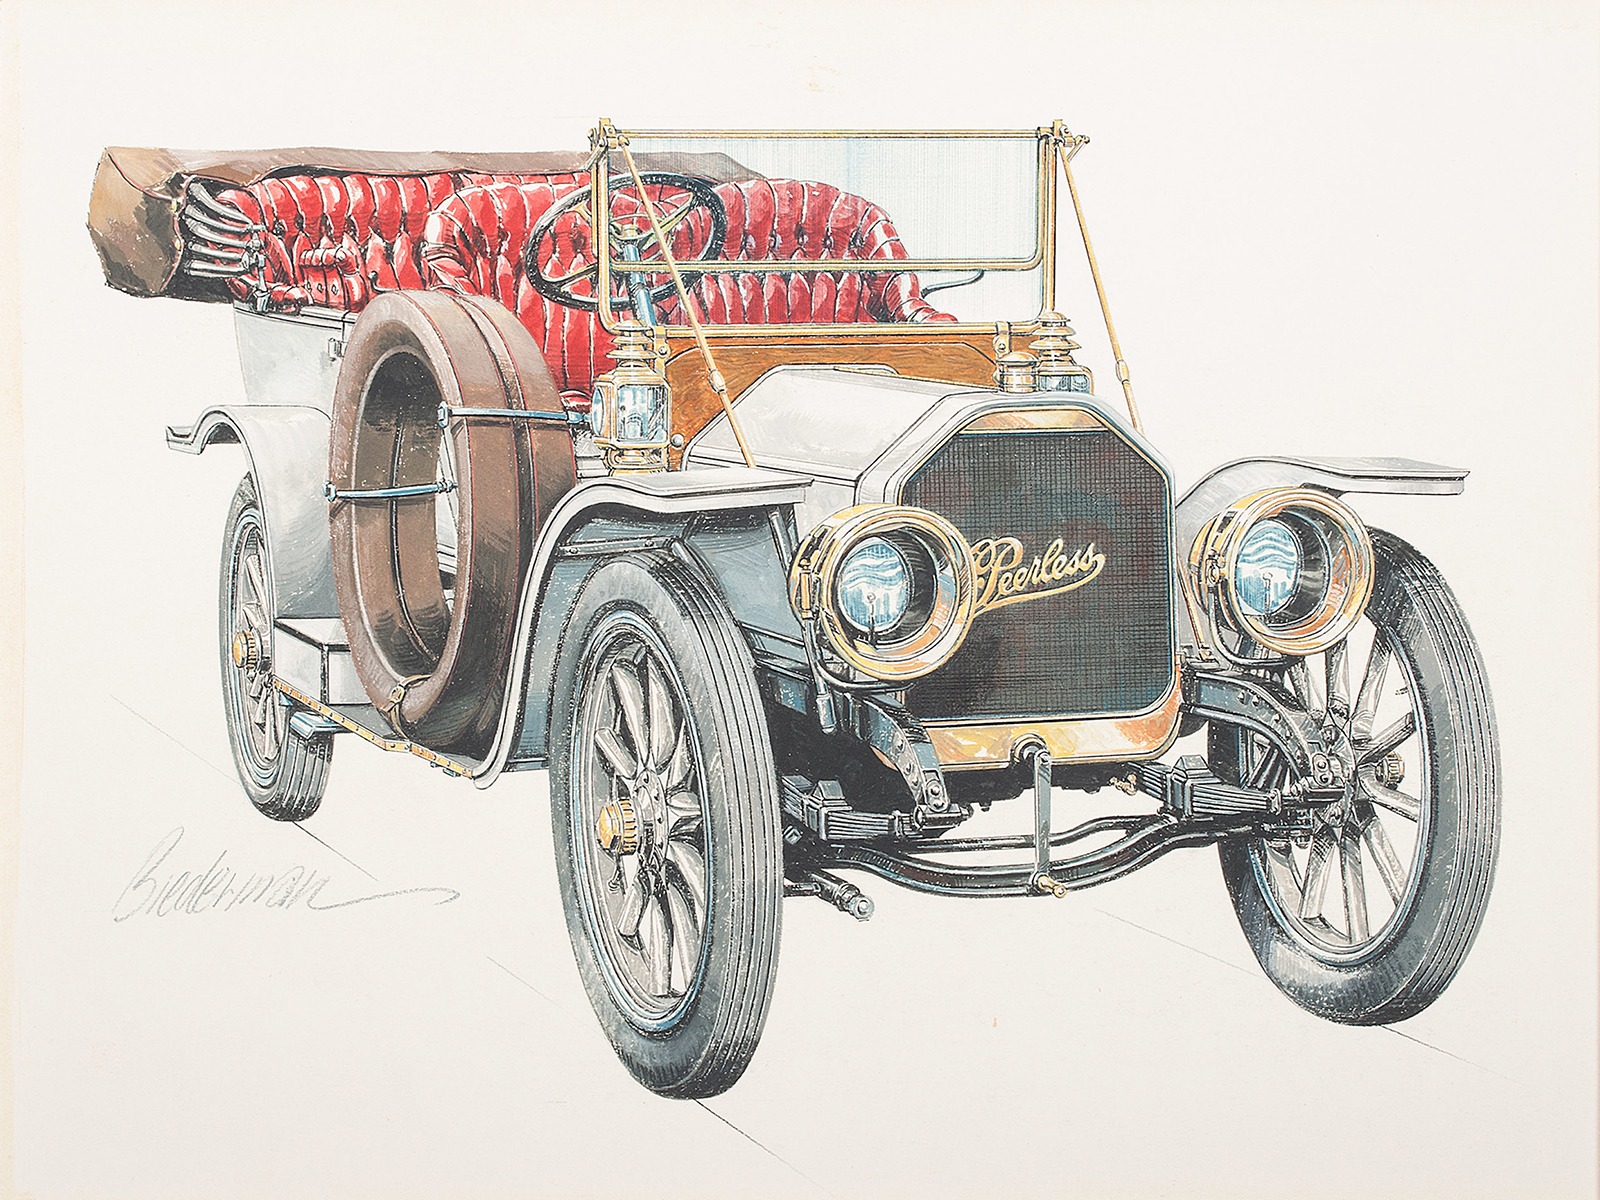 1909 Peerless 7-Passenger Touring: Illustrated by Jerome D. Biederman